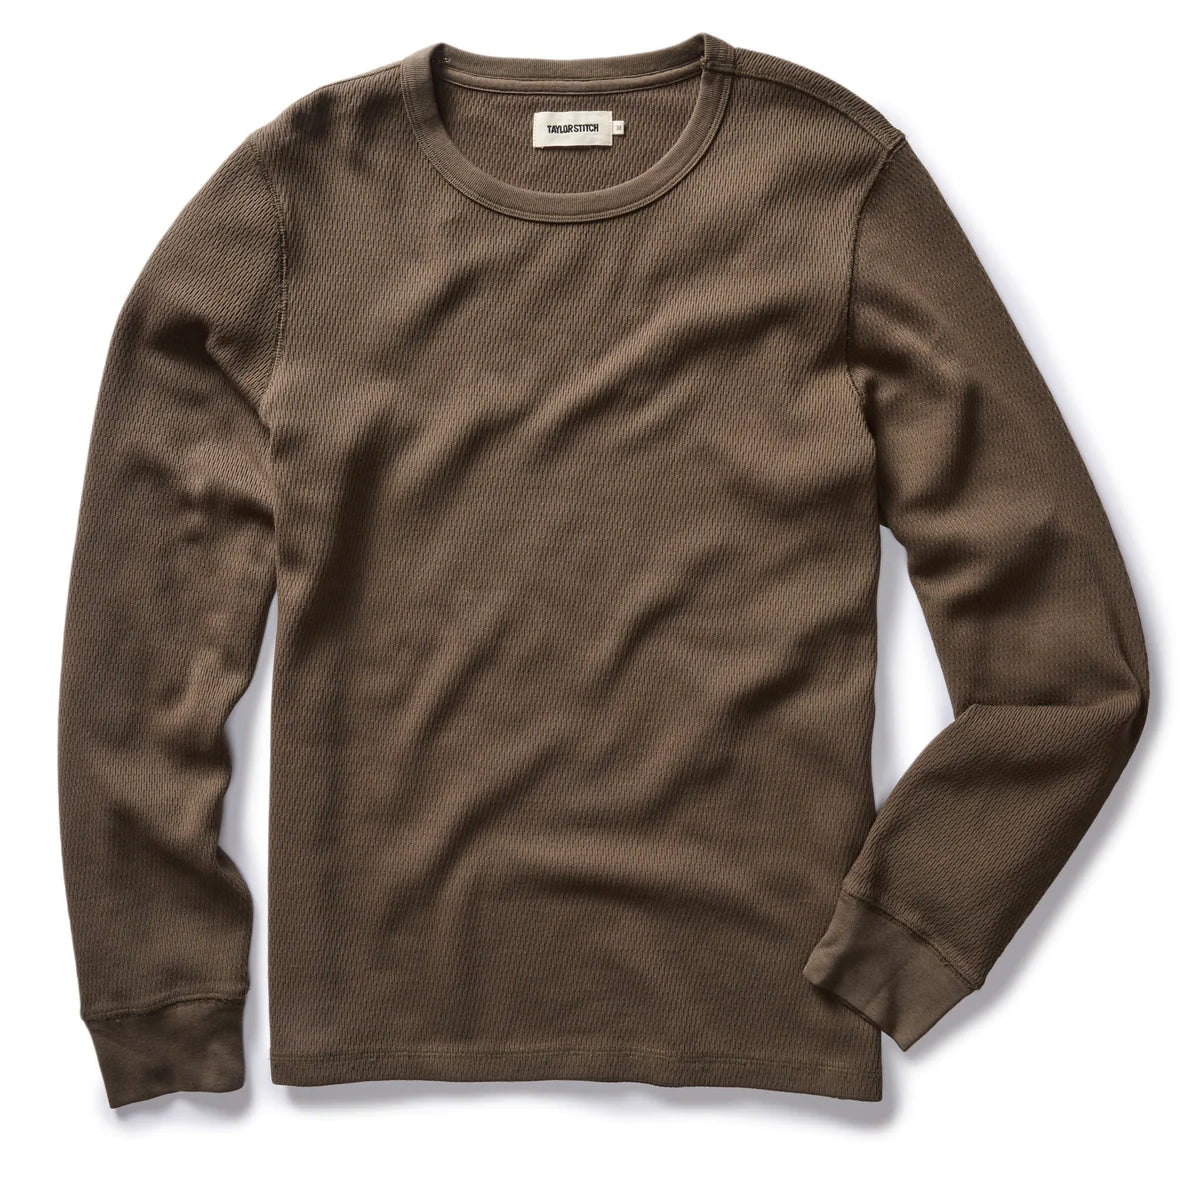 Taylor Stitch - Organic Cotton Waffle Crew Long Sleeve in Fatigue Olive